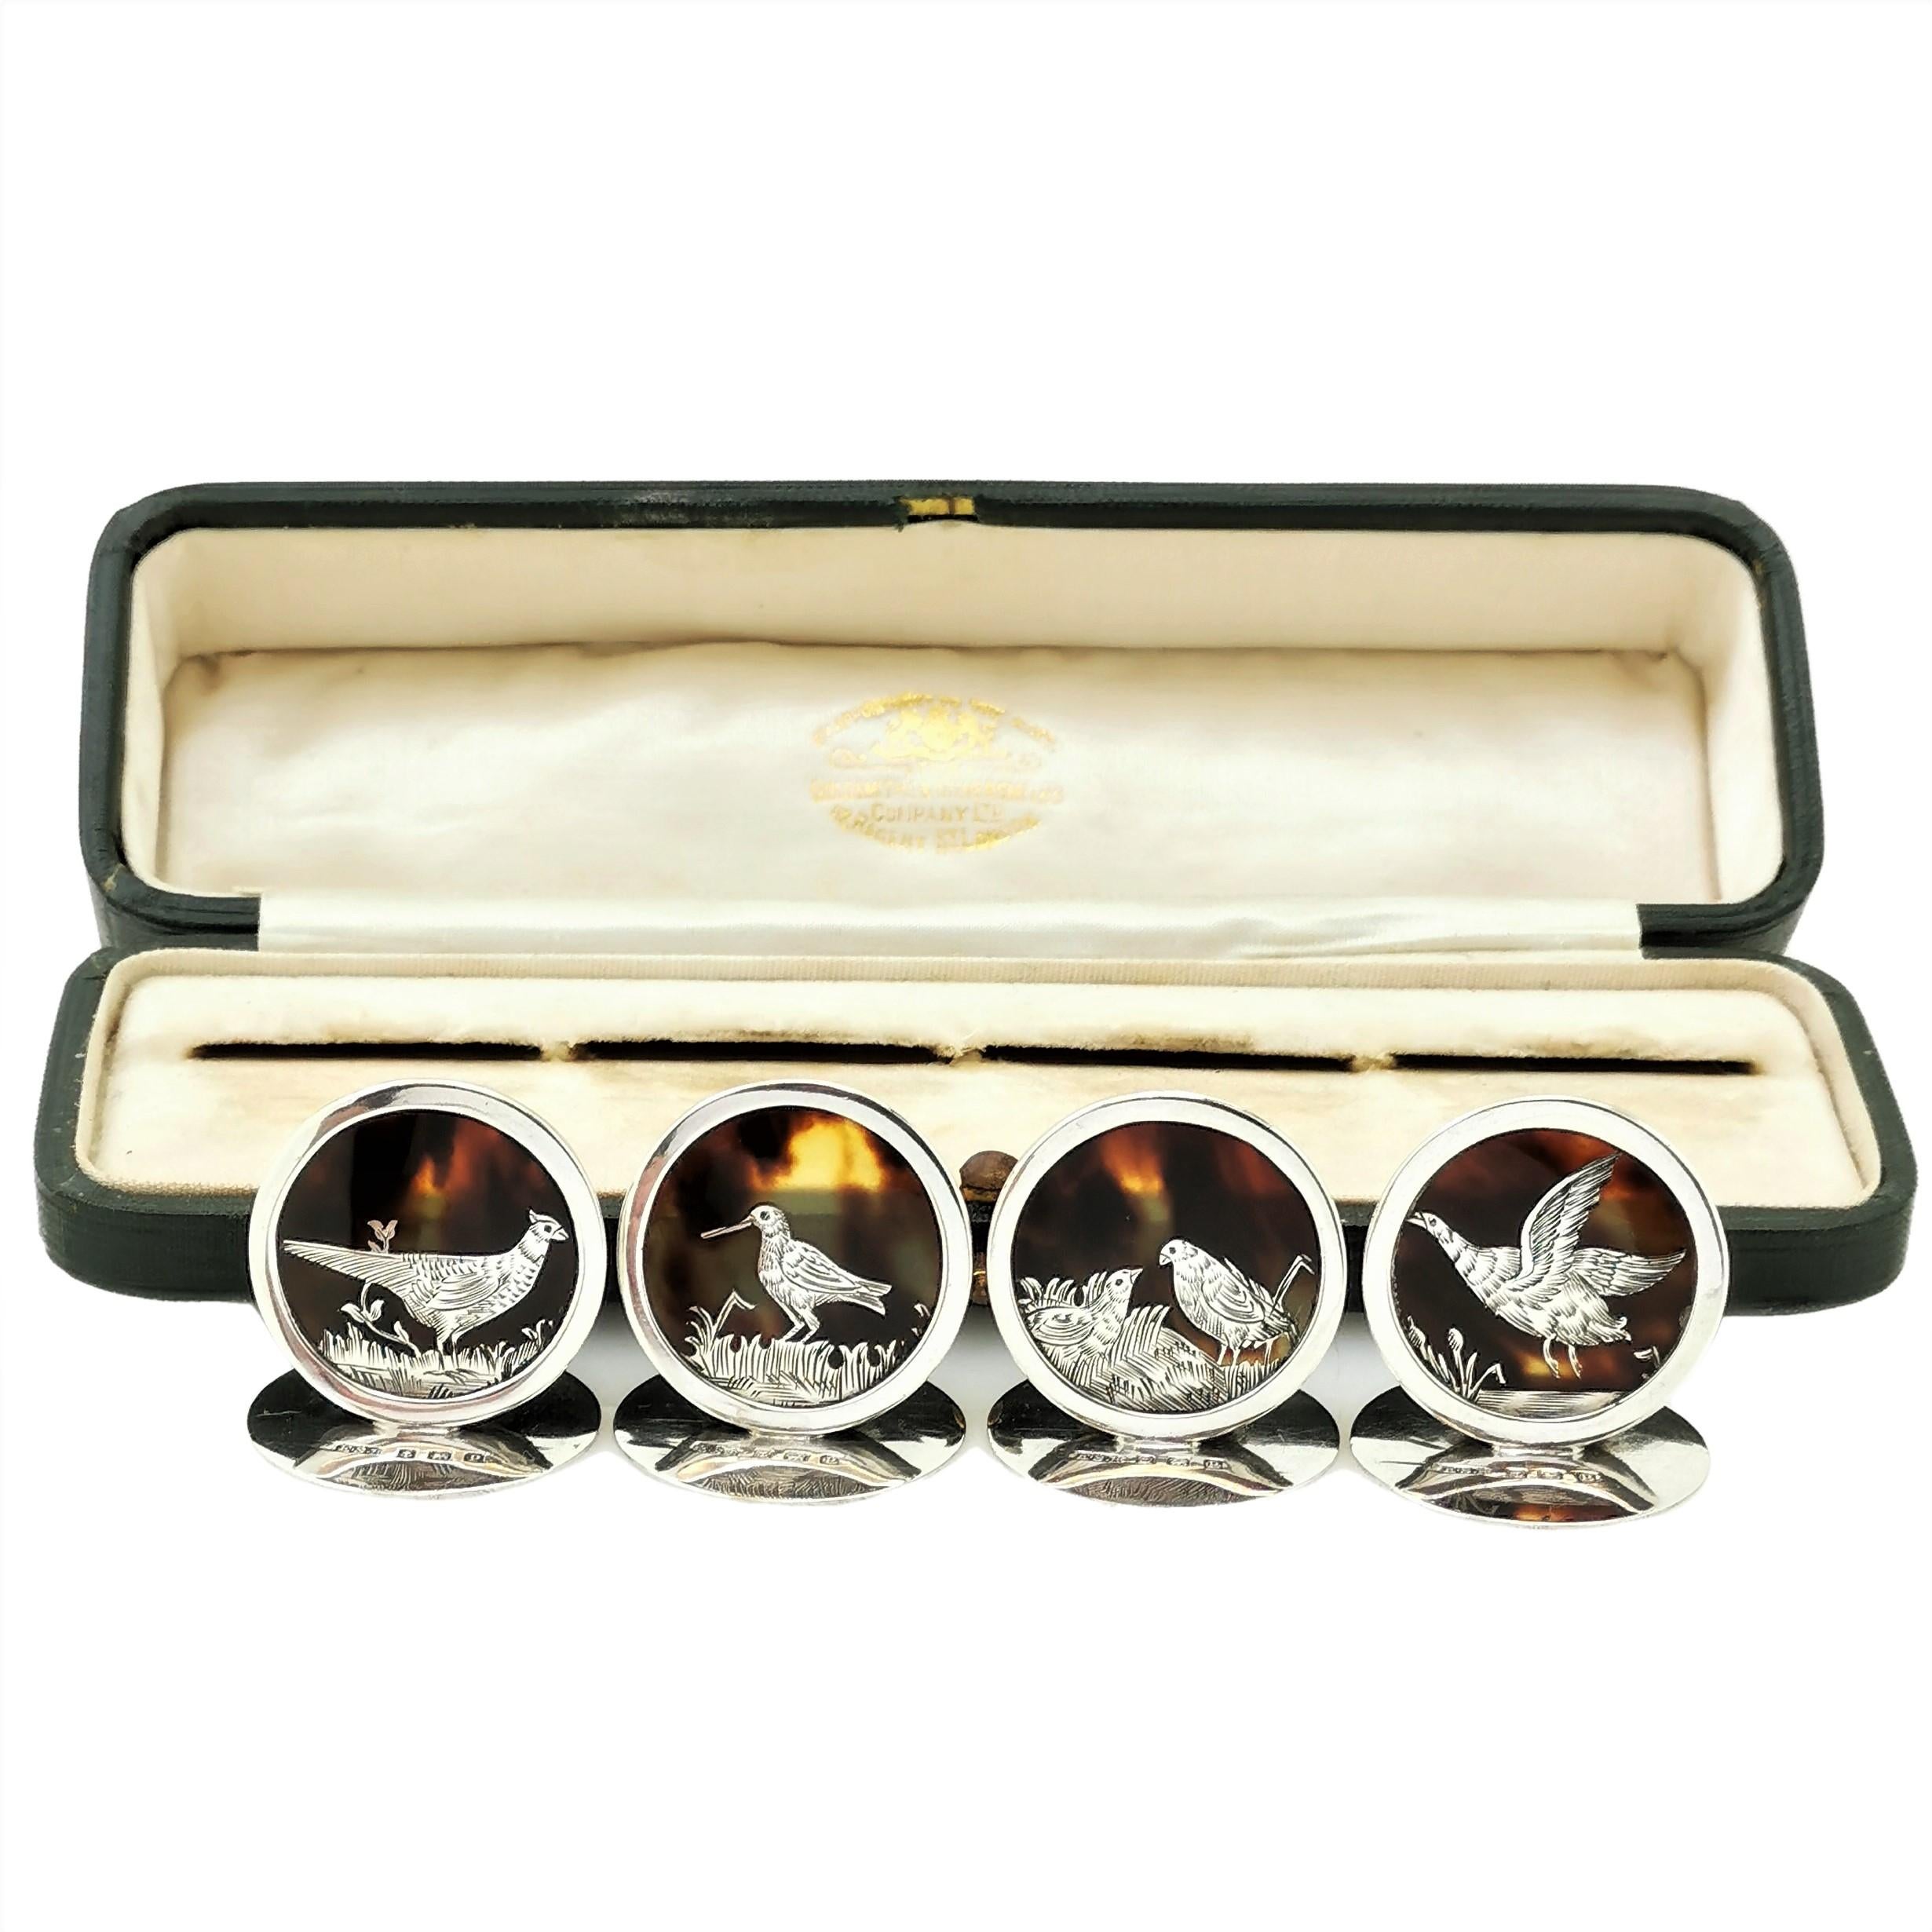 A set of beautiful antique sterling silver place card holders with circular tortoise shell panels inlaid with a unique silver game bird. These Menu Holders are presented in their original fitted case.

Made in Birmingham, England in 1914 by Edward